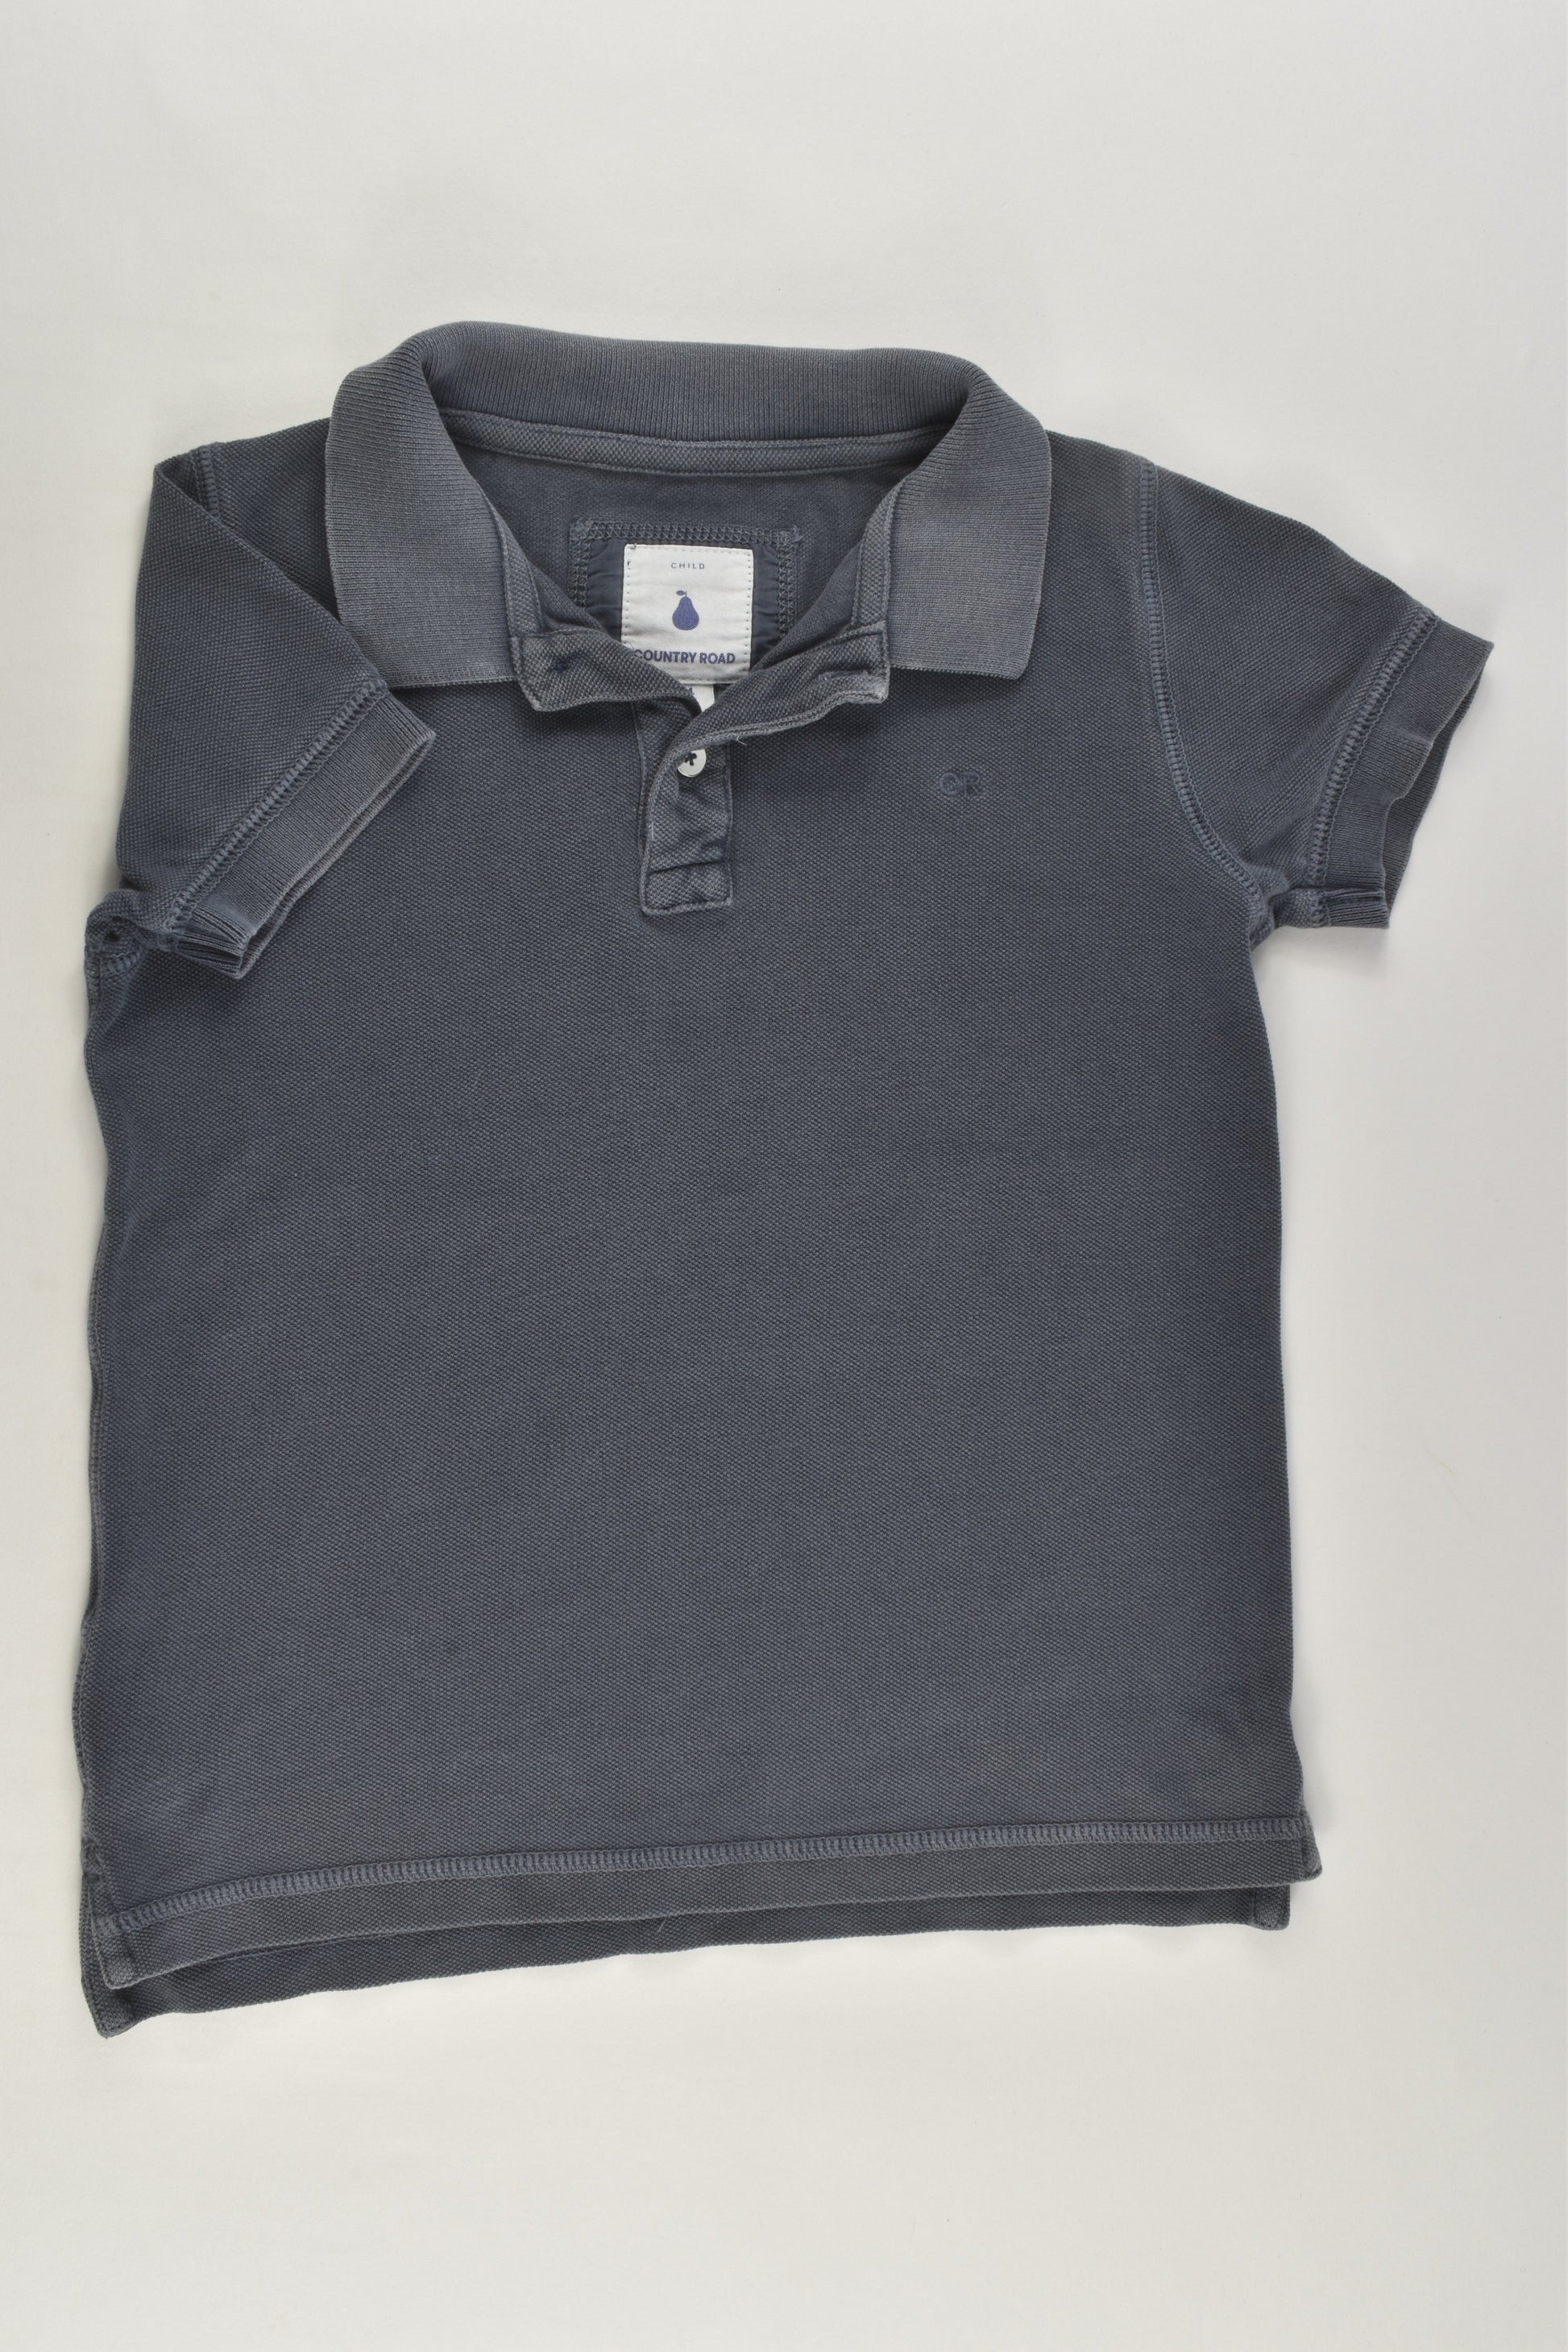 Country Road Size 4 Polo Shirt